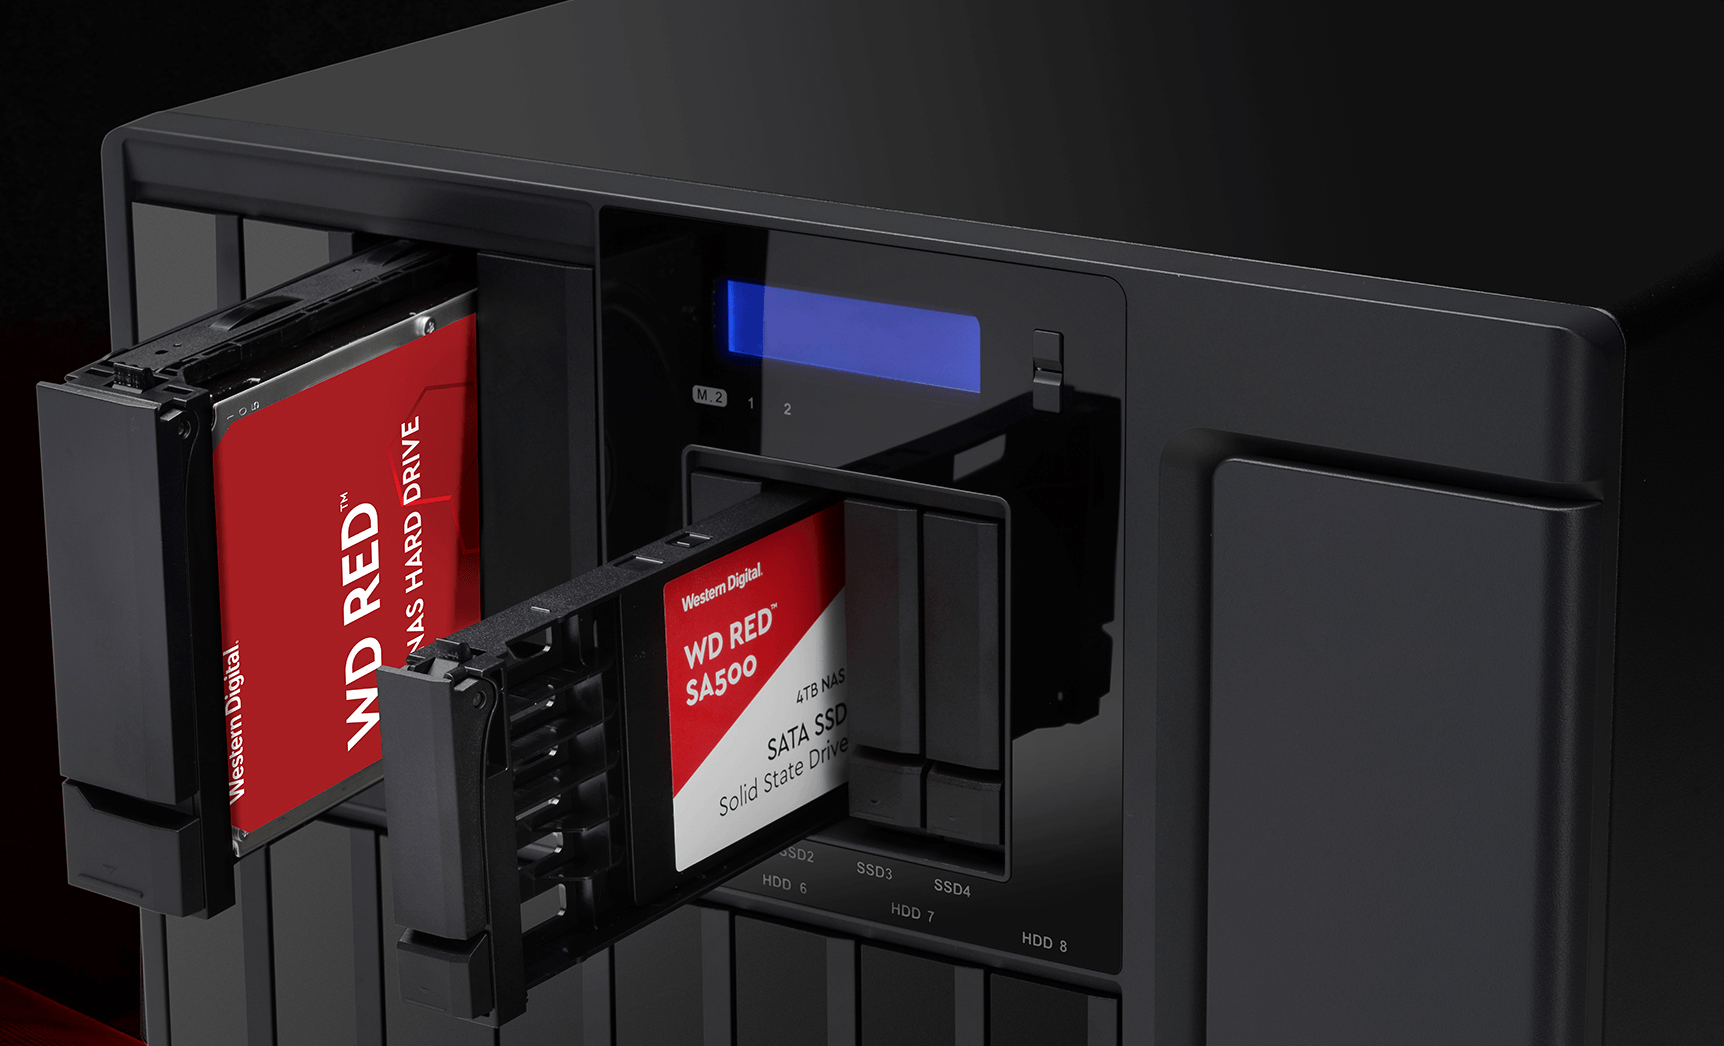 Vi ses i morgen parkere Forkert Western Digital Launches WD Red SA500 Caching SSDs for NAS